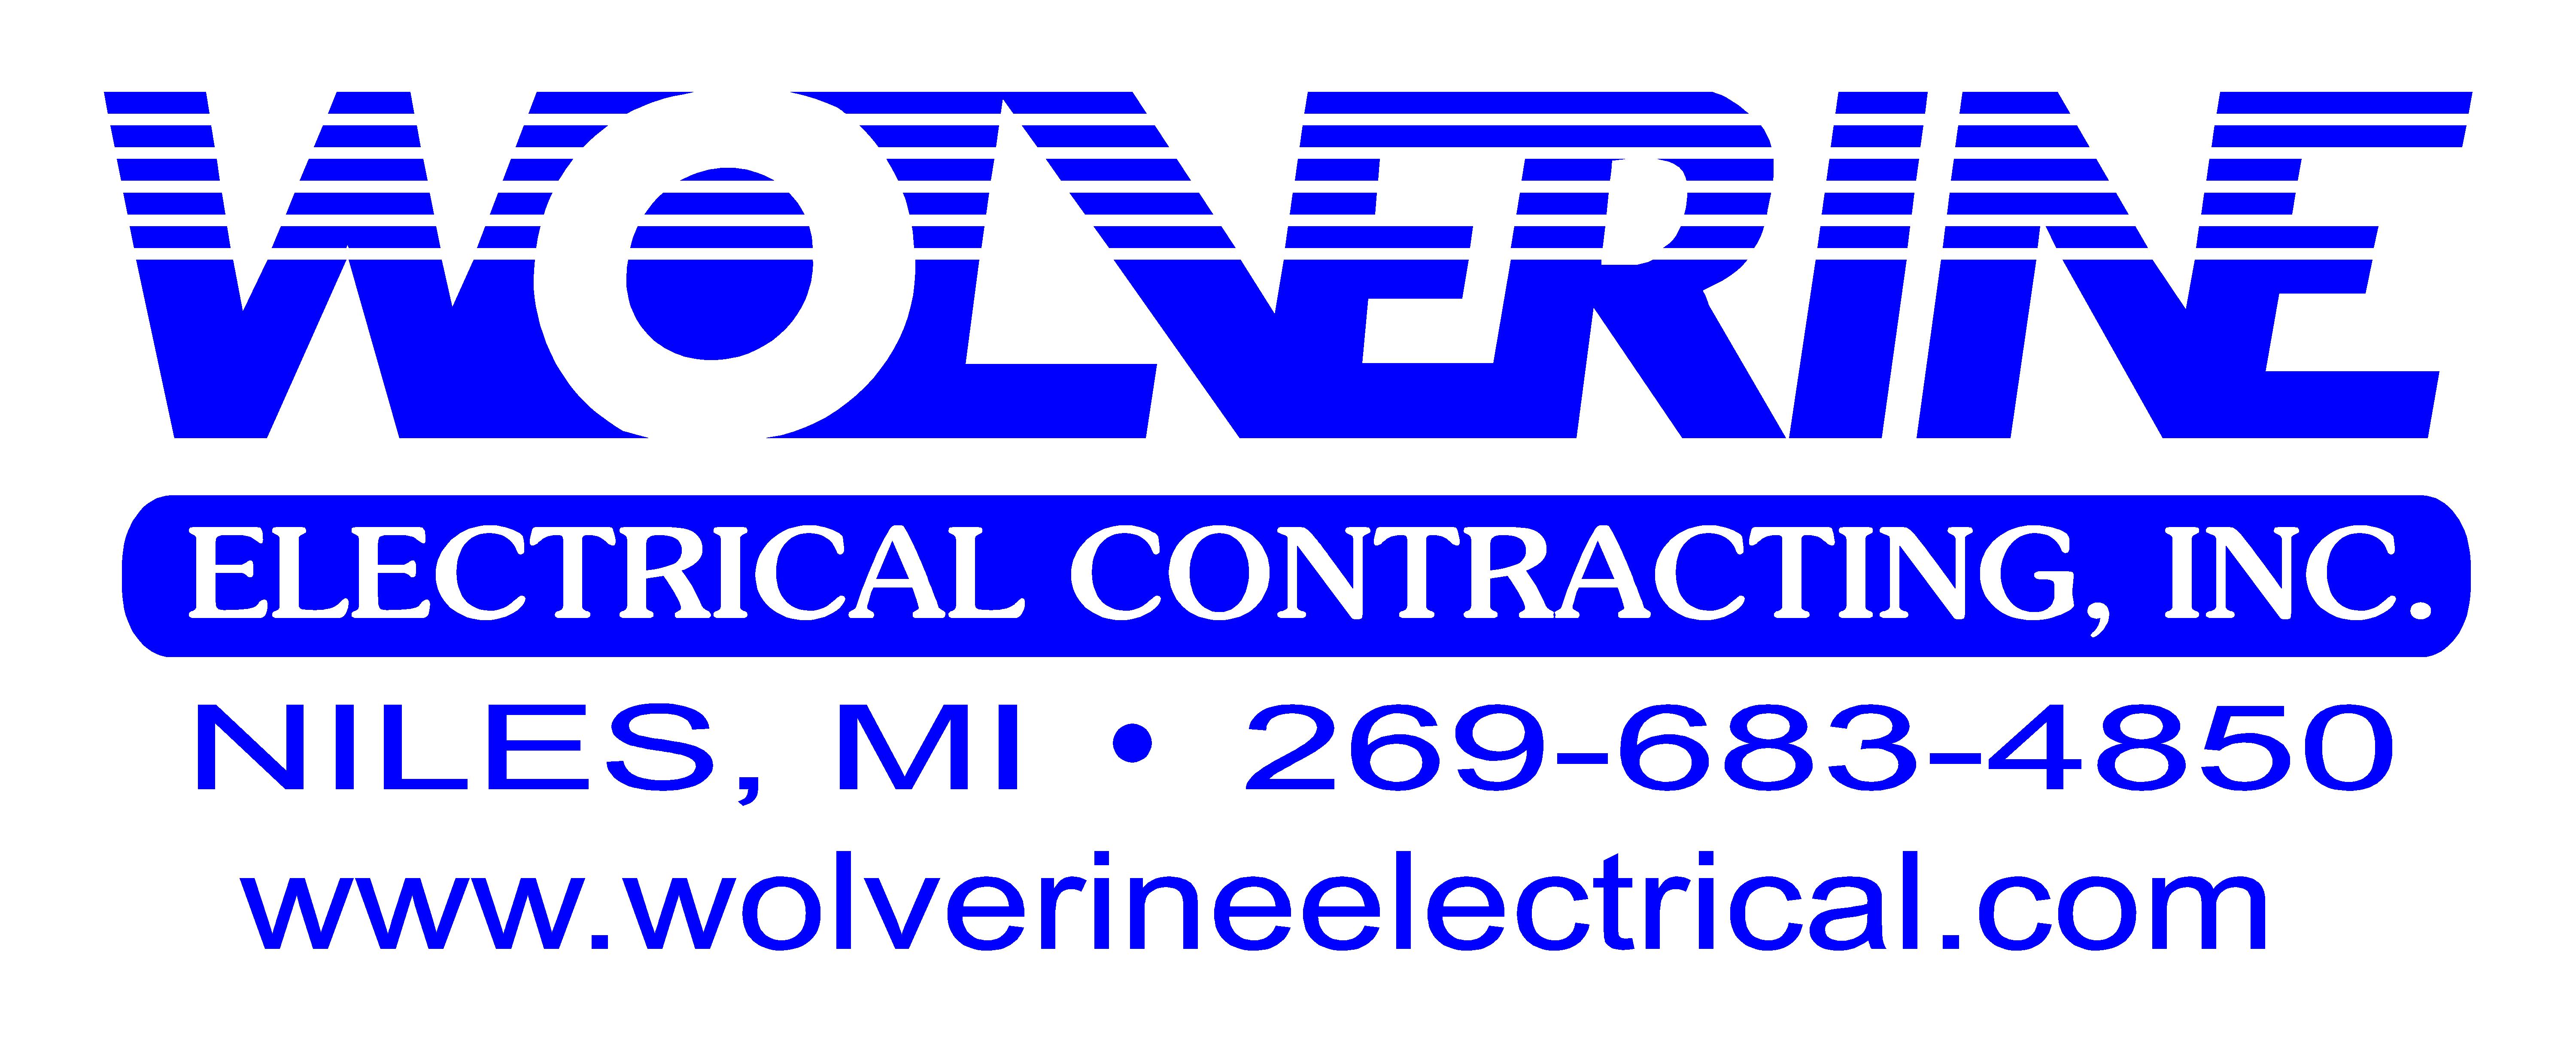 Wolverine Electric is a partner of LifePlan